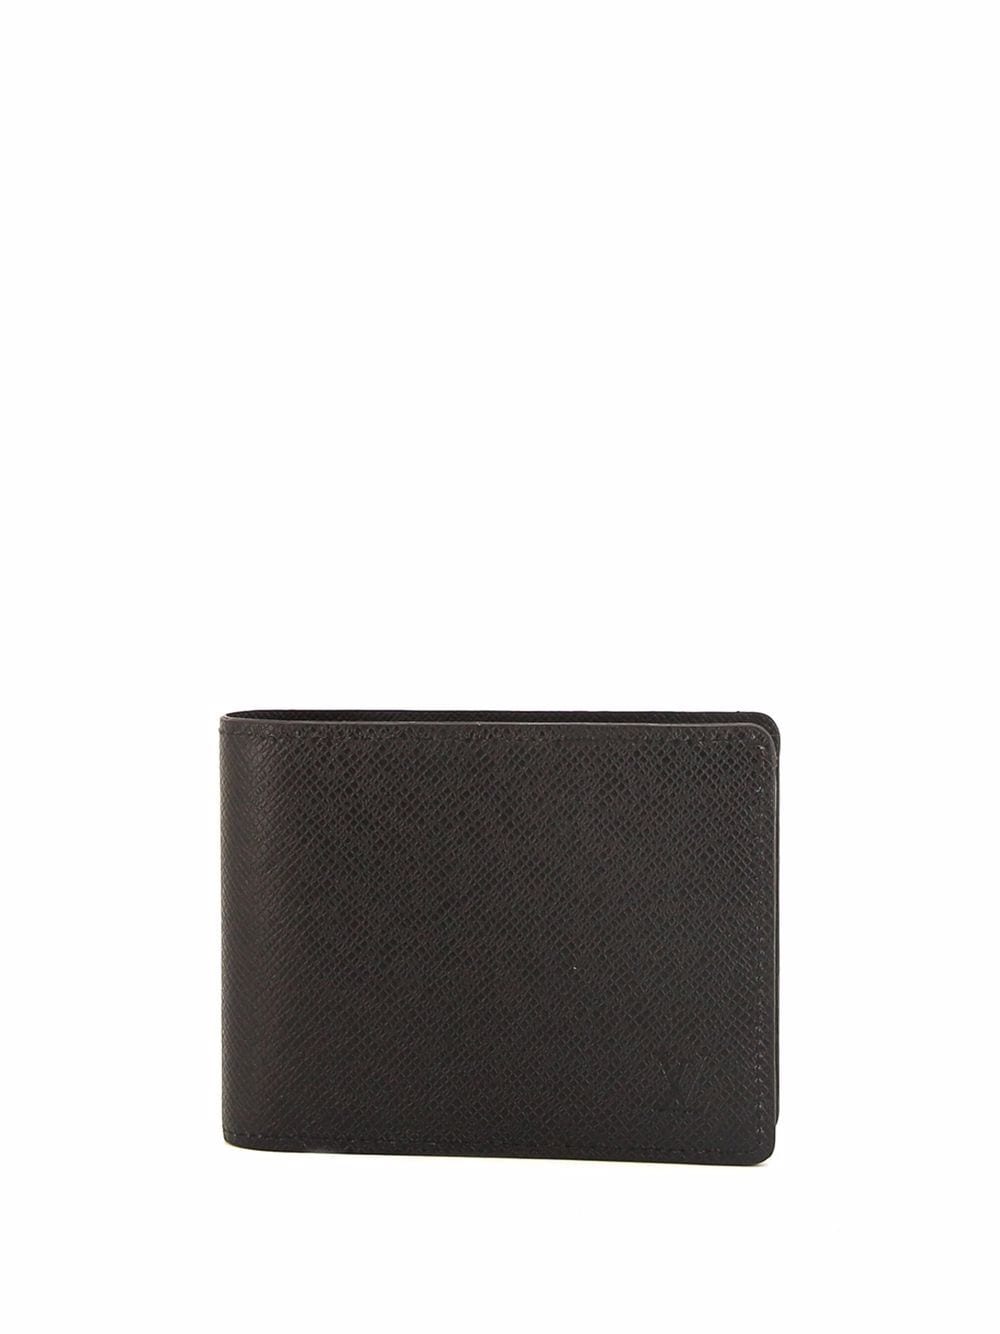 Buy Pre-Owned Louis Vuitton Multiple Wallet in Black Taiga Leather